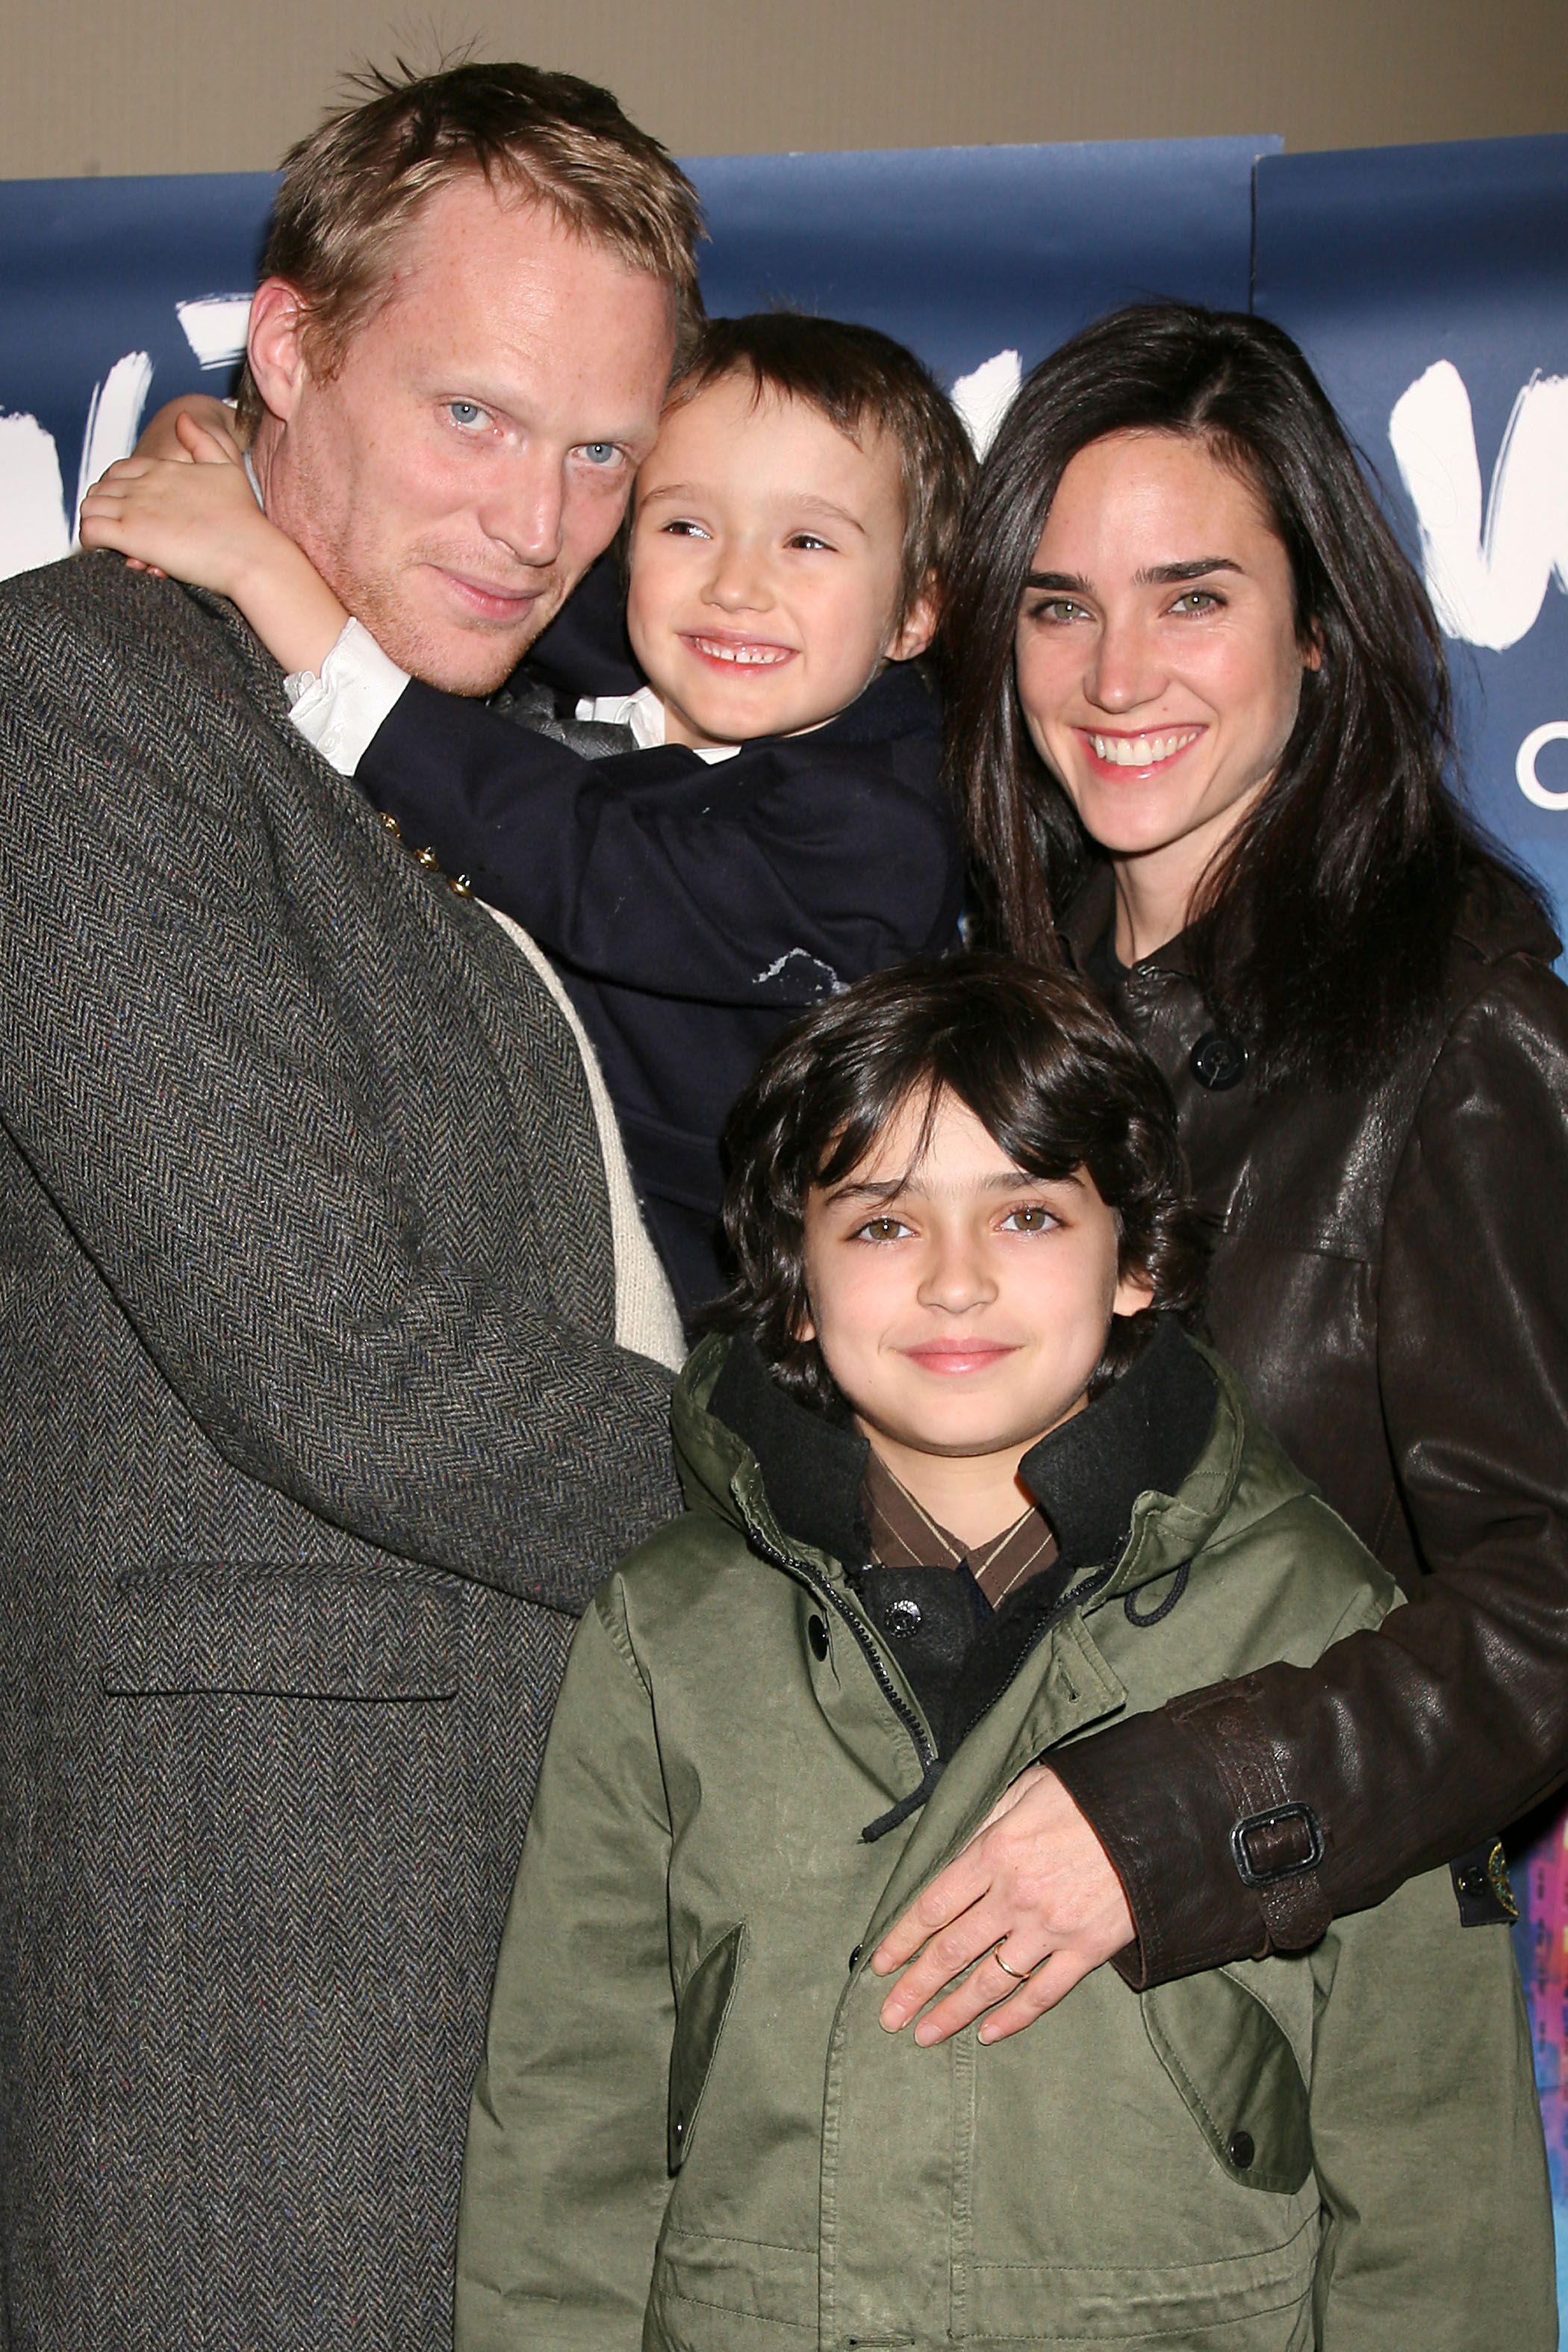 <p>"WandaVision" star Paul Bettany carried son Stellan Bettany (then 4) while wife Jennifer Connelly put an arm around son Kai Dugan (then 10; his father is photographer David Dugan) at the Cirque du Soleil "Wintuk" show premiere at Madison Square Garden in New York City in November 2007. The couple are also parents to daughter Agnes, who was born in 2011. Keep reading to see the boys as adults...</p>